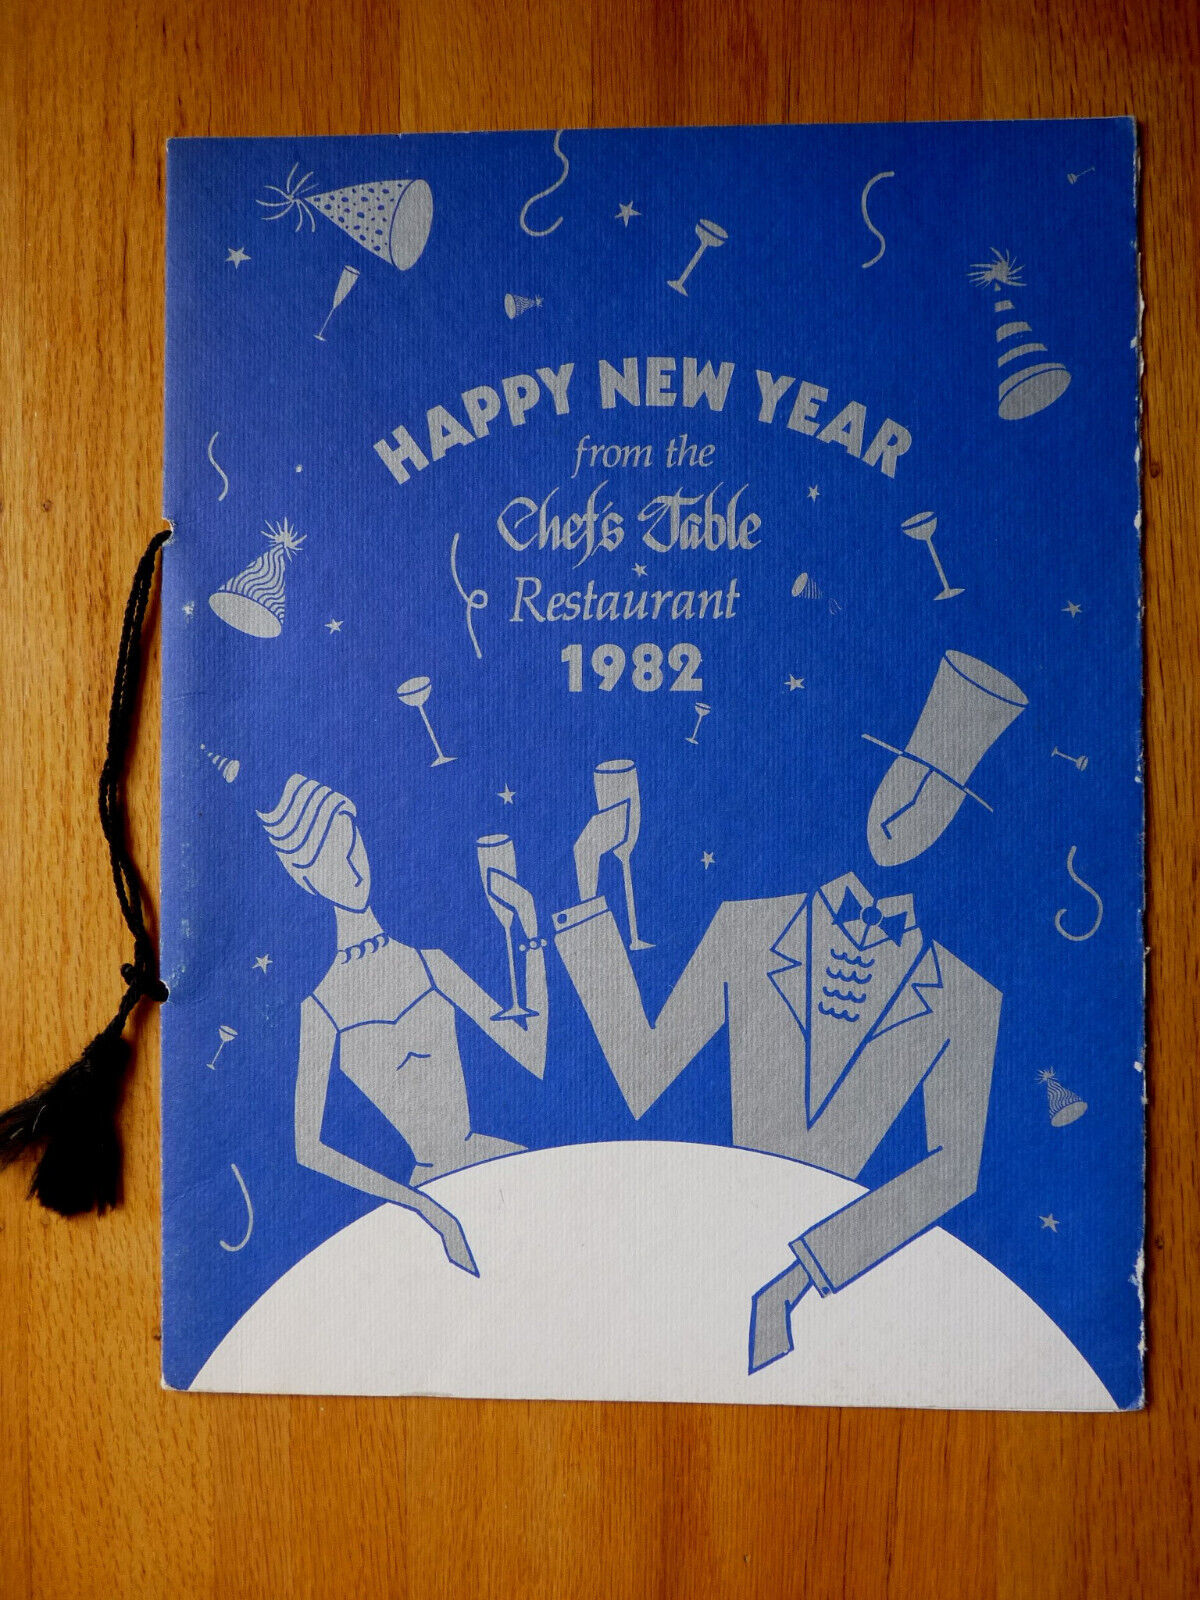 CHEF\'S TABLE MENU- 1982 NEW YEARS EVE- Hilton Hotel - SAN FRANCISCO- French Food